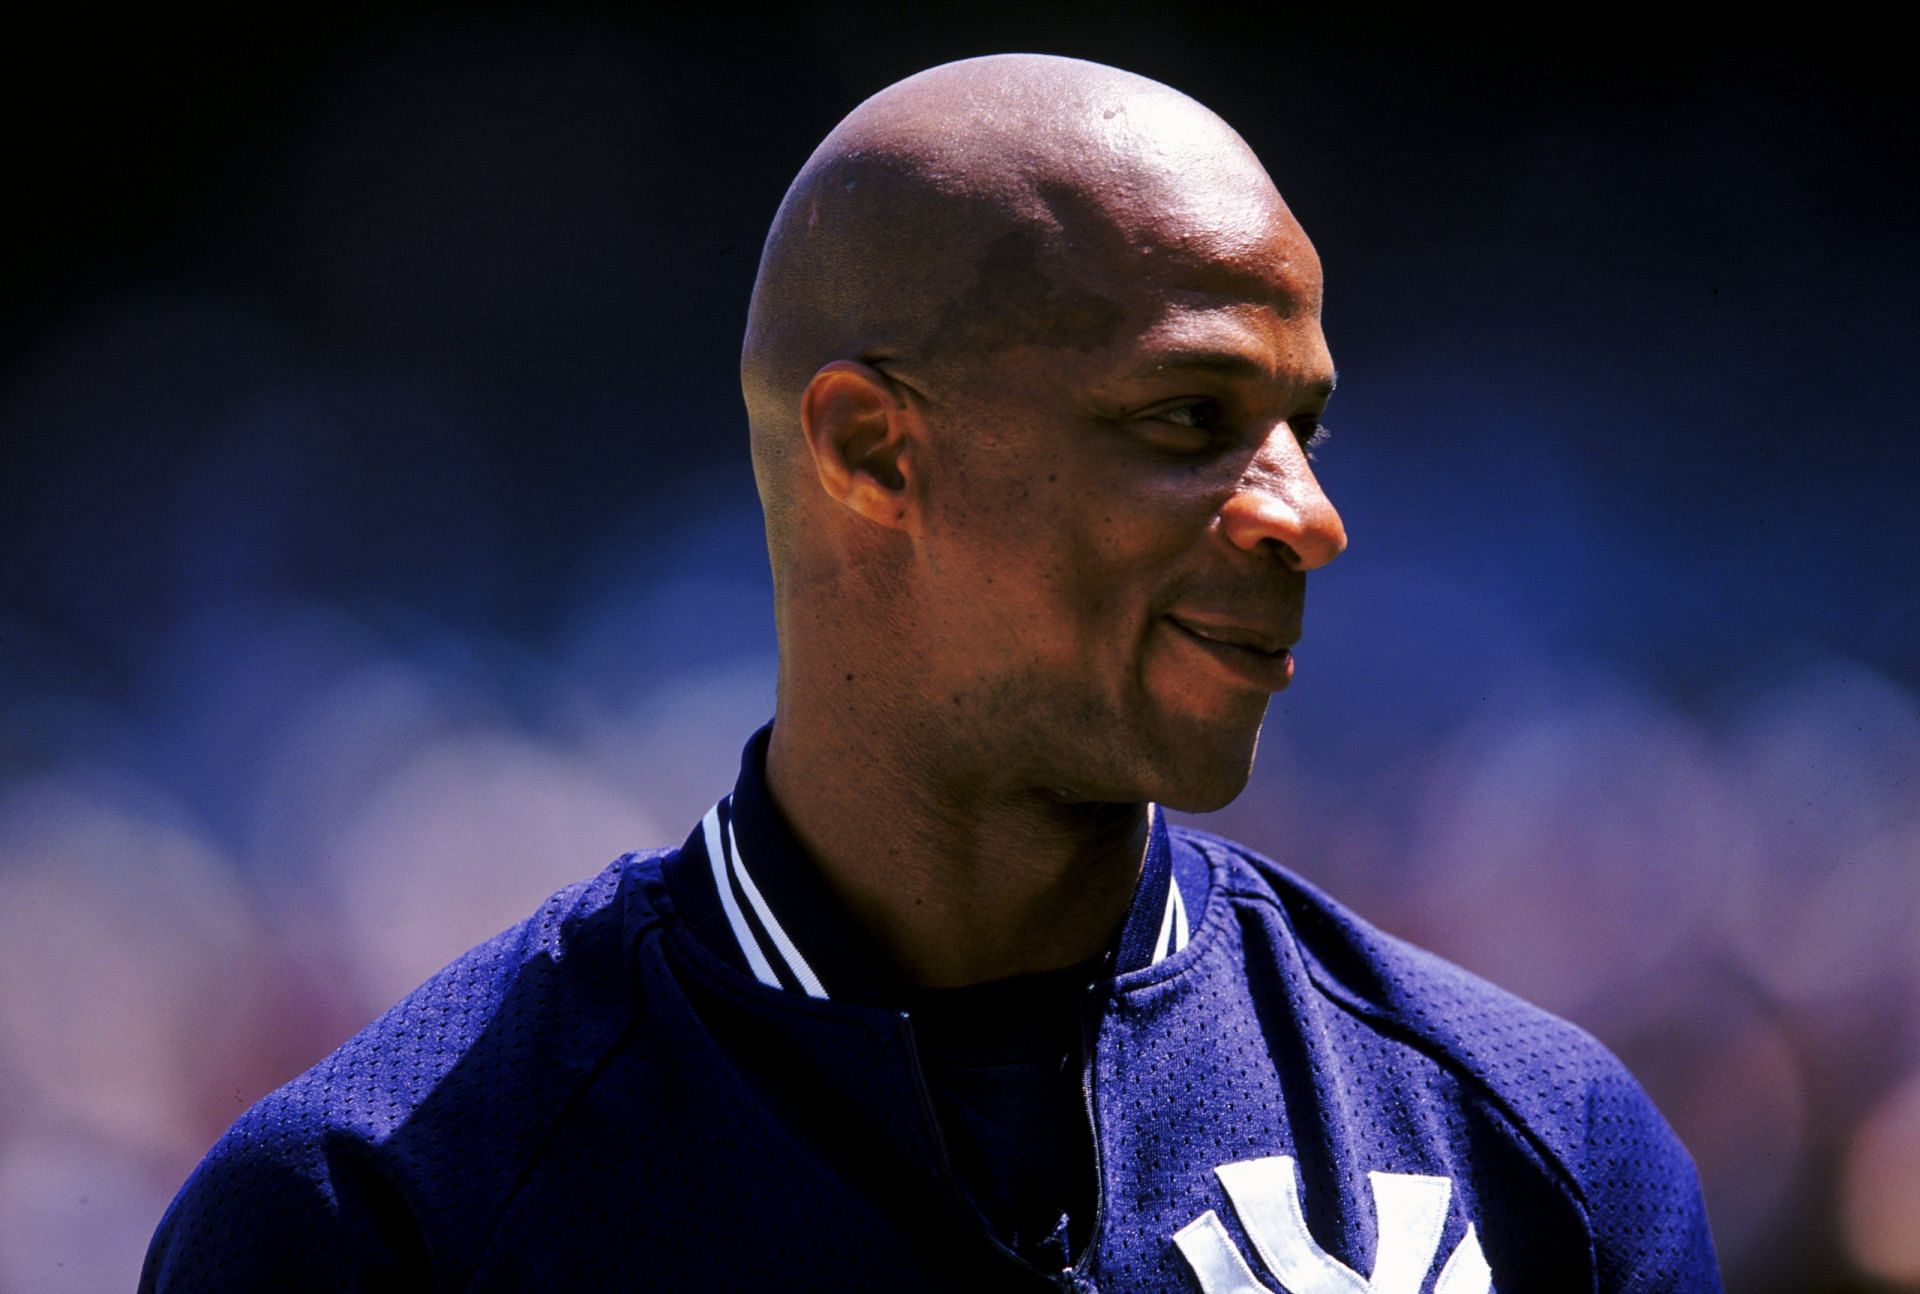 Darryl Strawberry reflects on '98 Yankees, '86 Mets, Doc, Keith